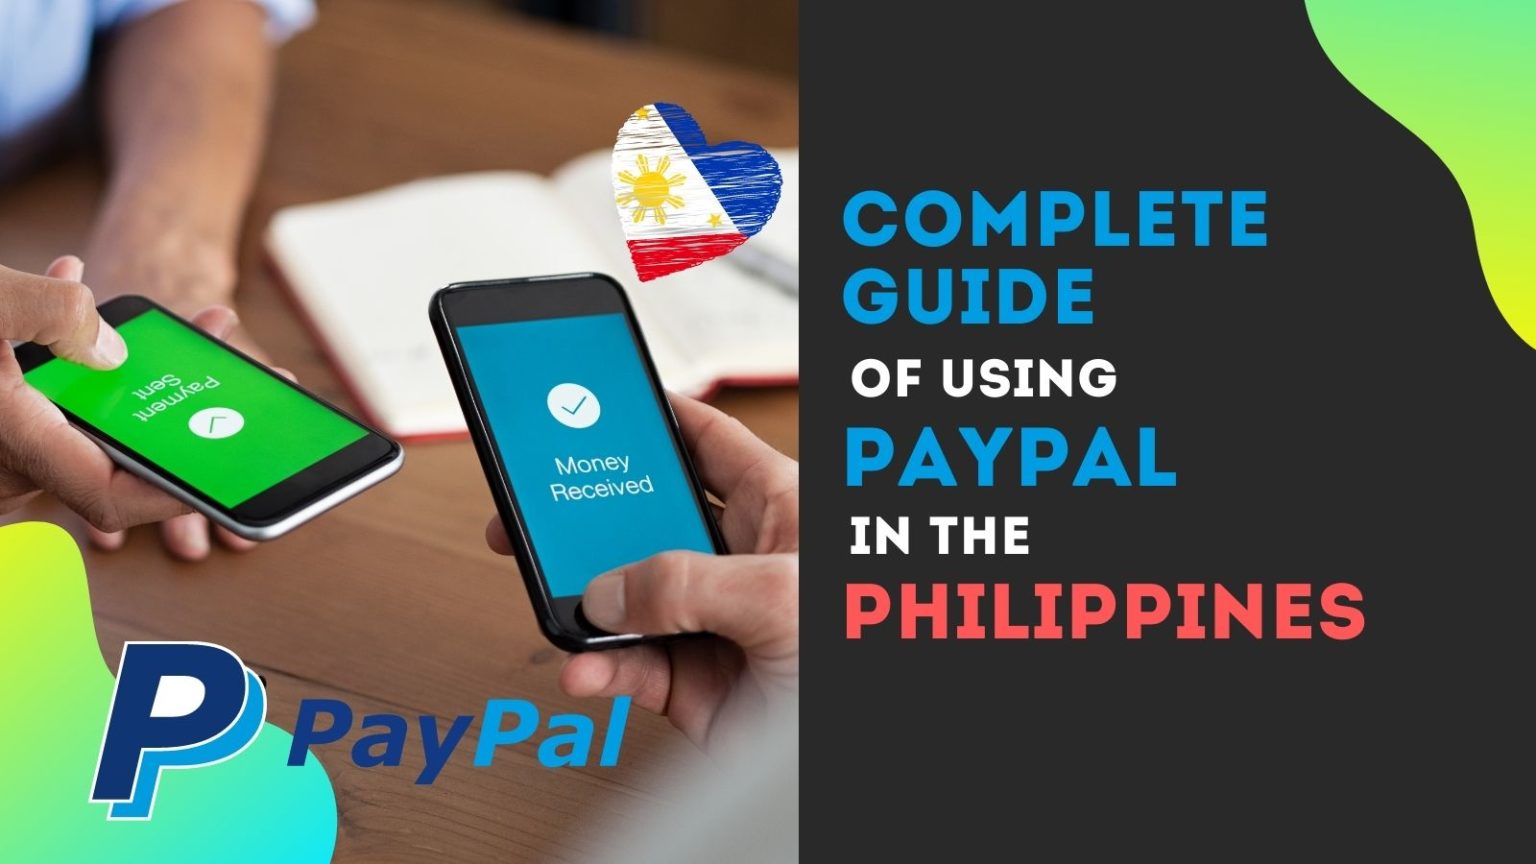 How to Create Paypal Account in the Philippines and Withdraw Funds